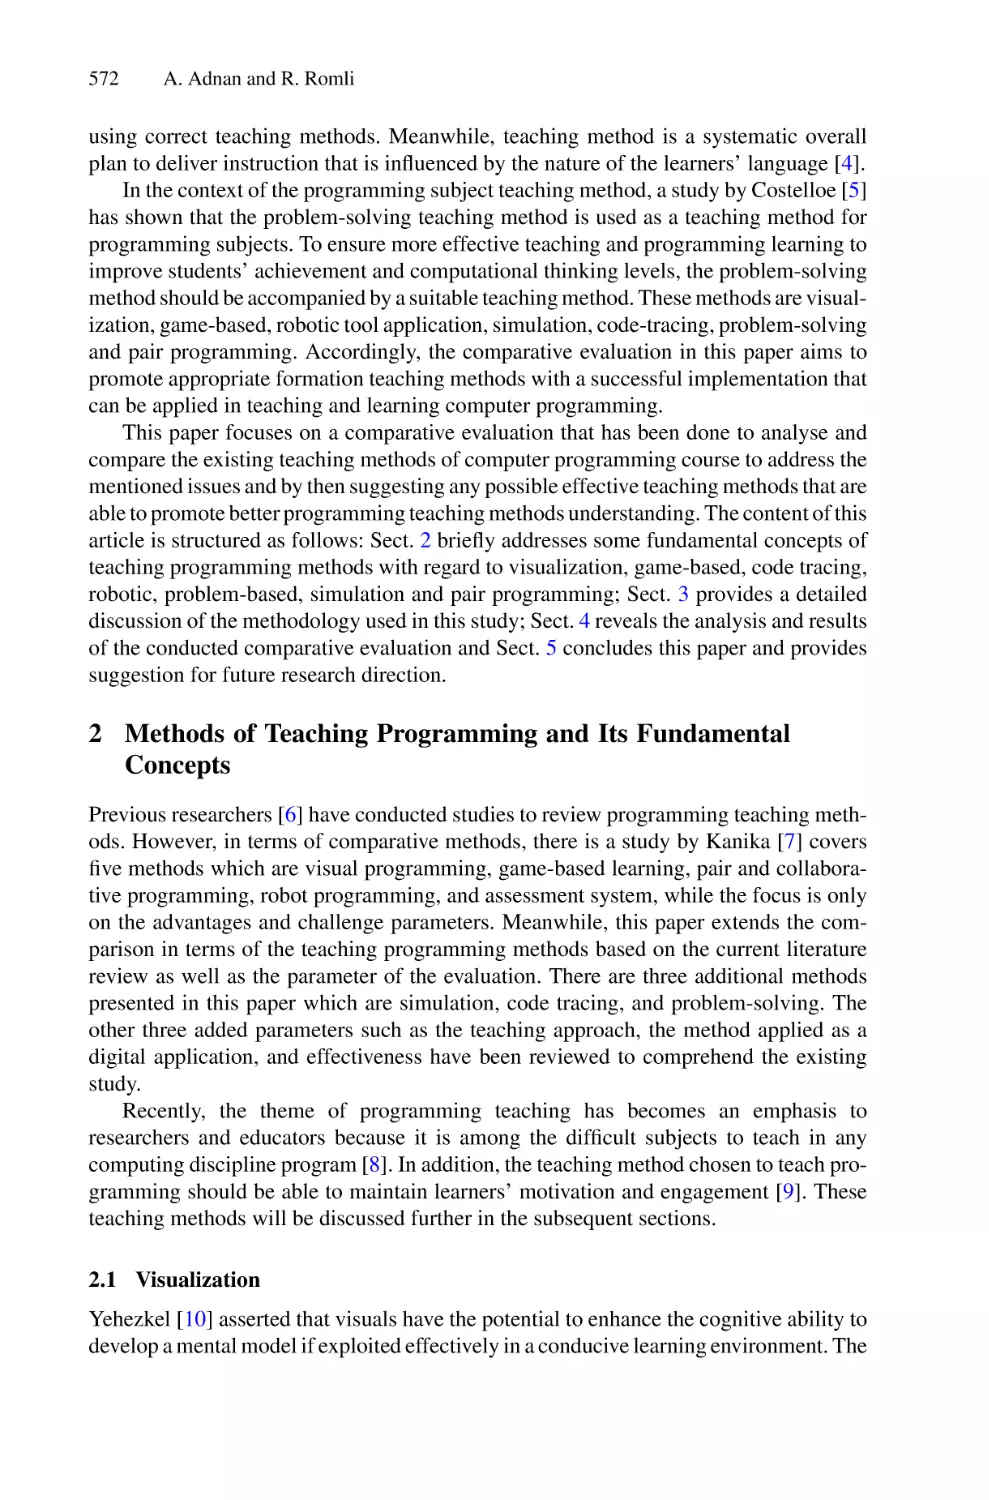 2 Methods of Teaching Programming and Its Fundamental Concepts
2.1 Visualization